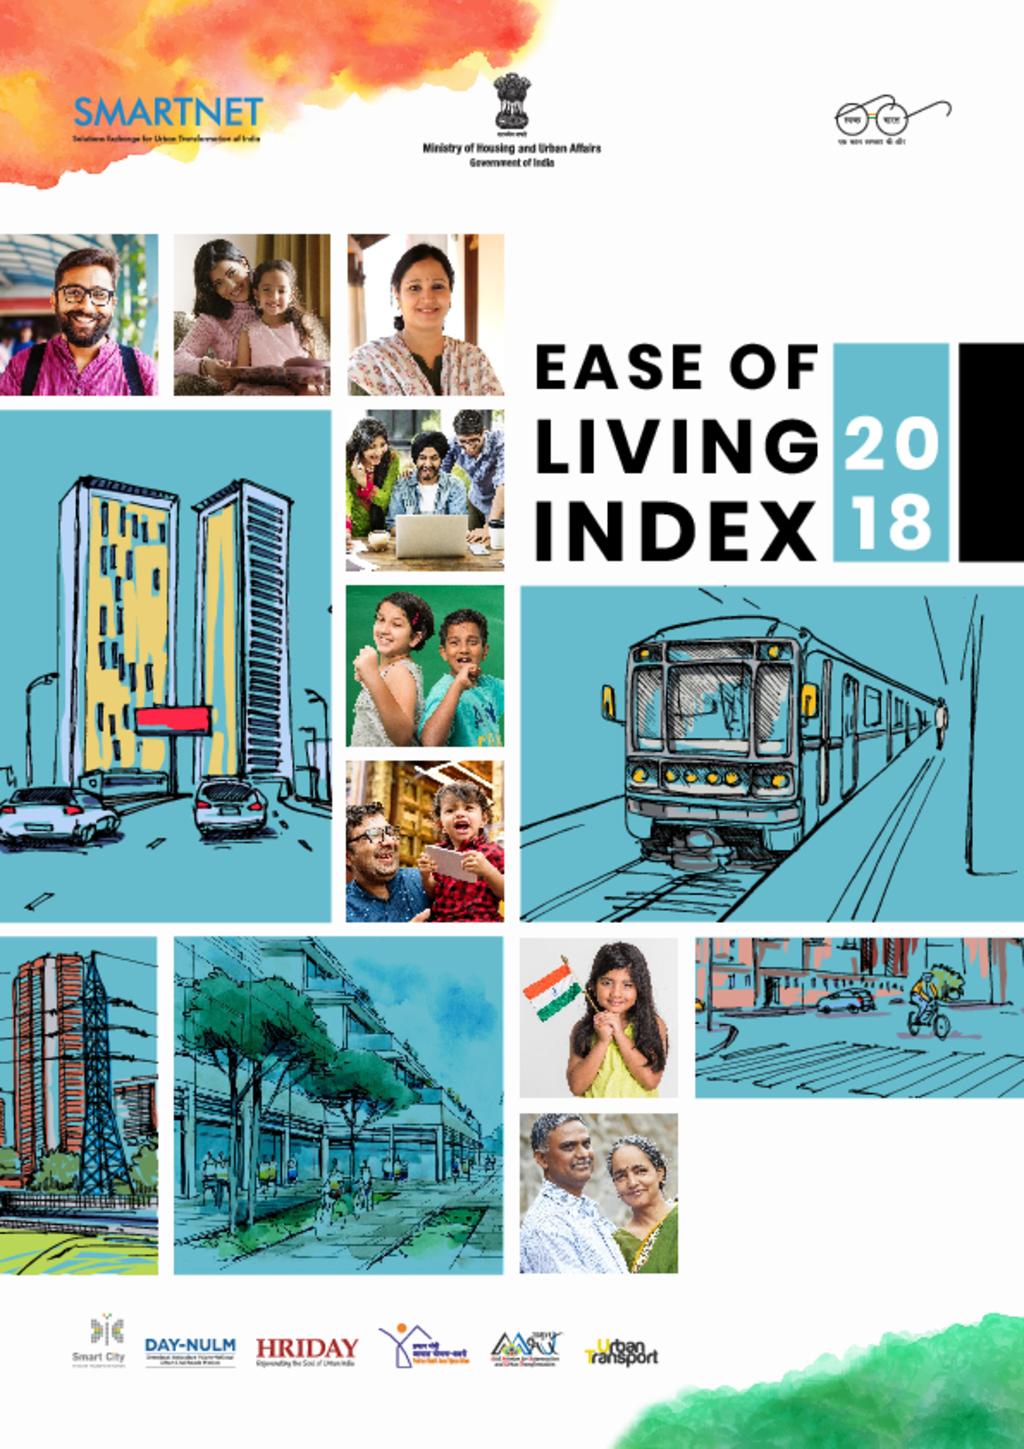 Ease of living Index